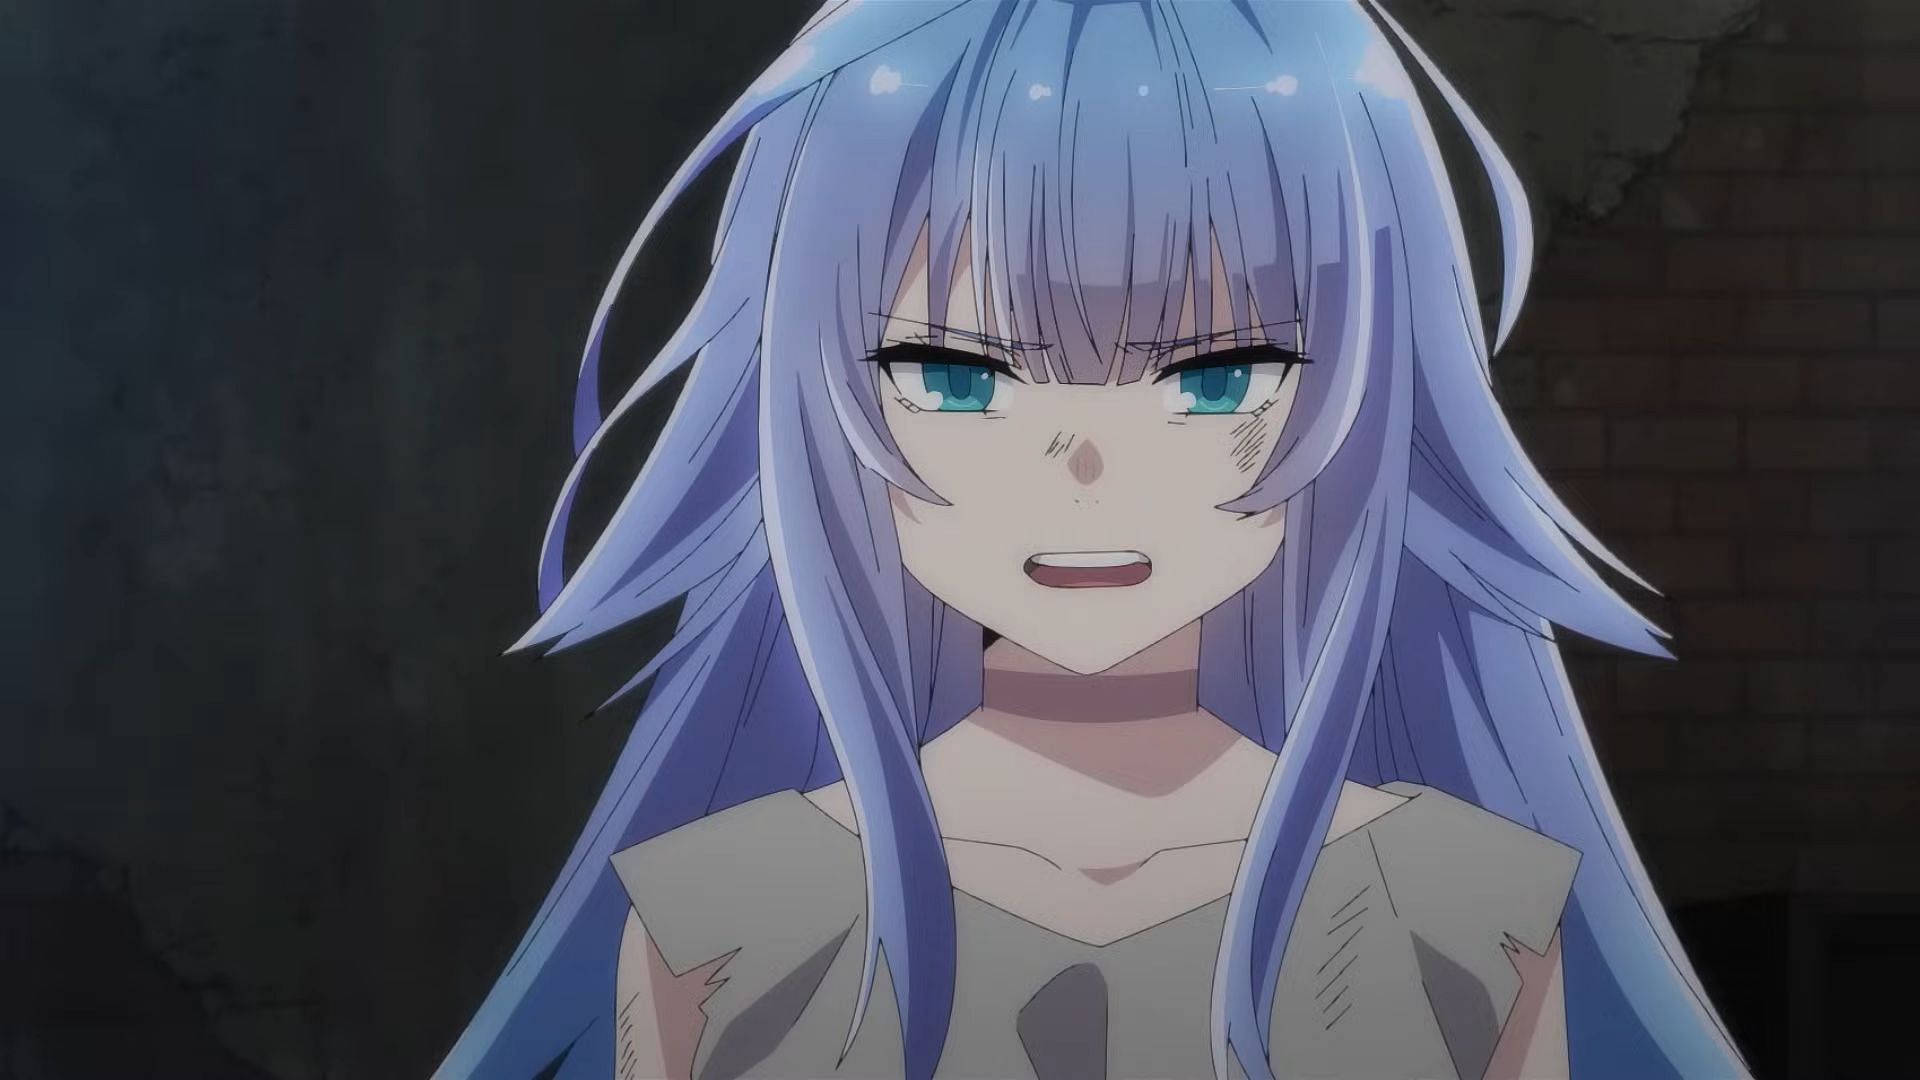 Charlotte Reiss as seen in the anime (Image via Studio Mother)